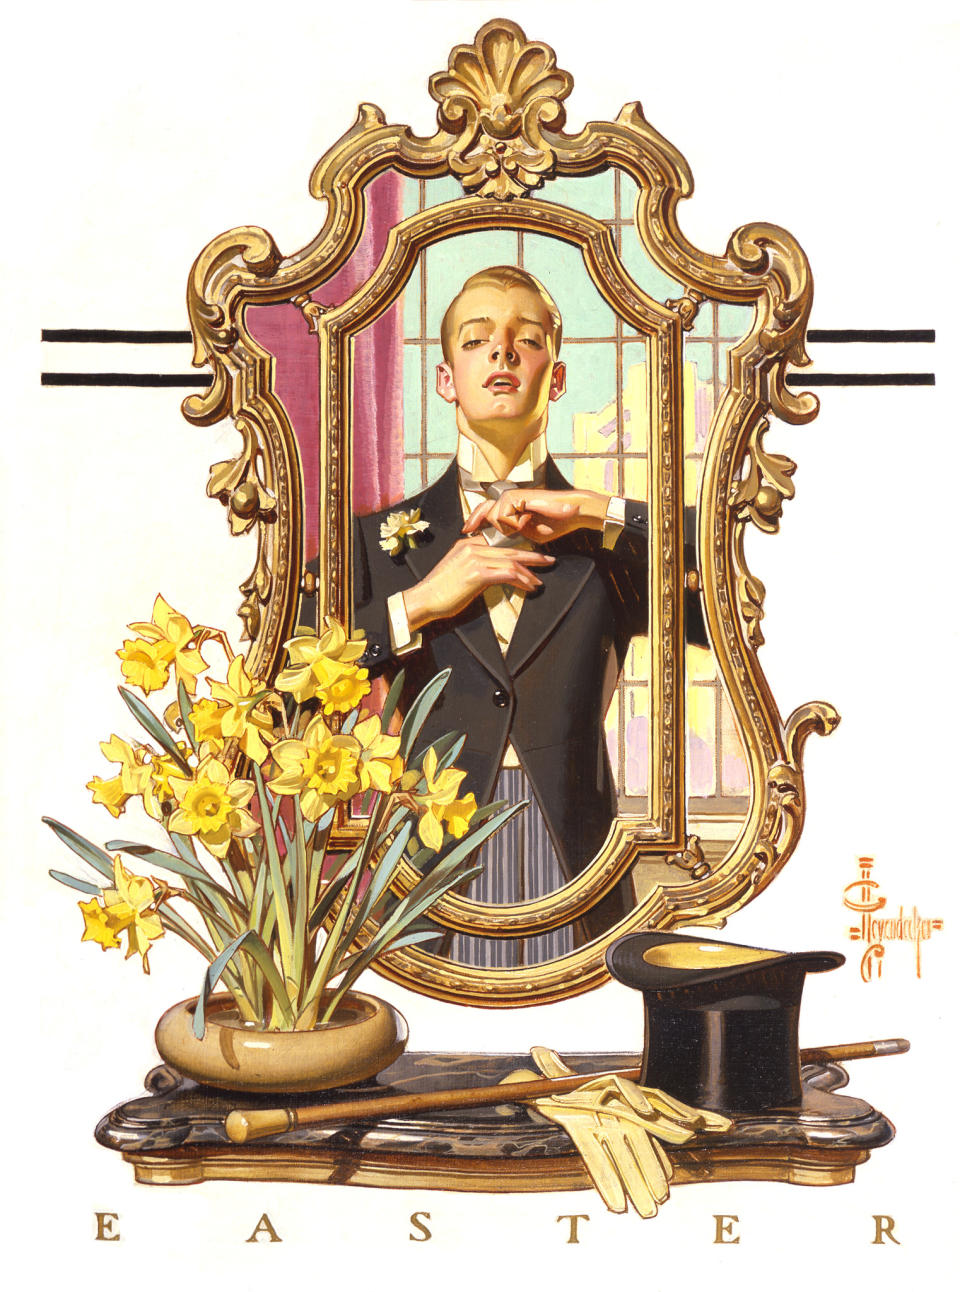 “Easter, (Man in the Mirror)” from a 1936 Saturday Evening Post cover.